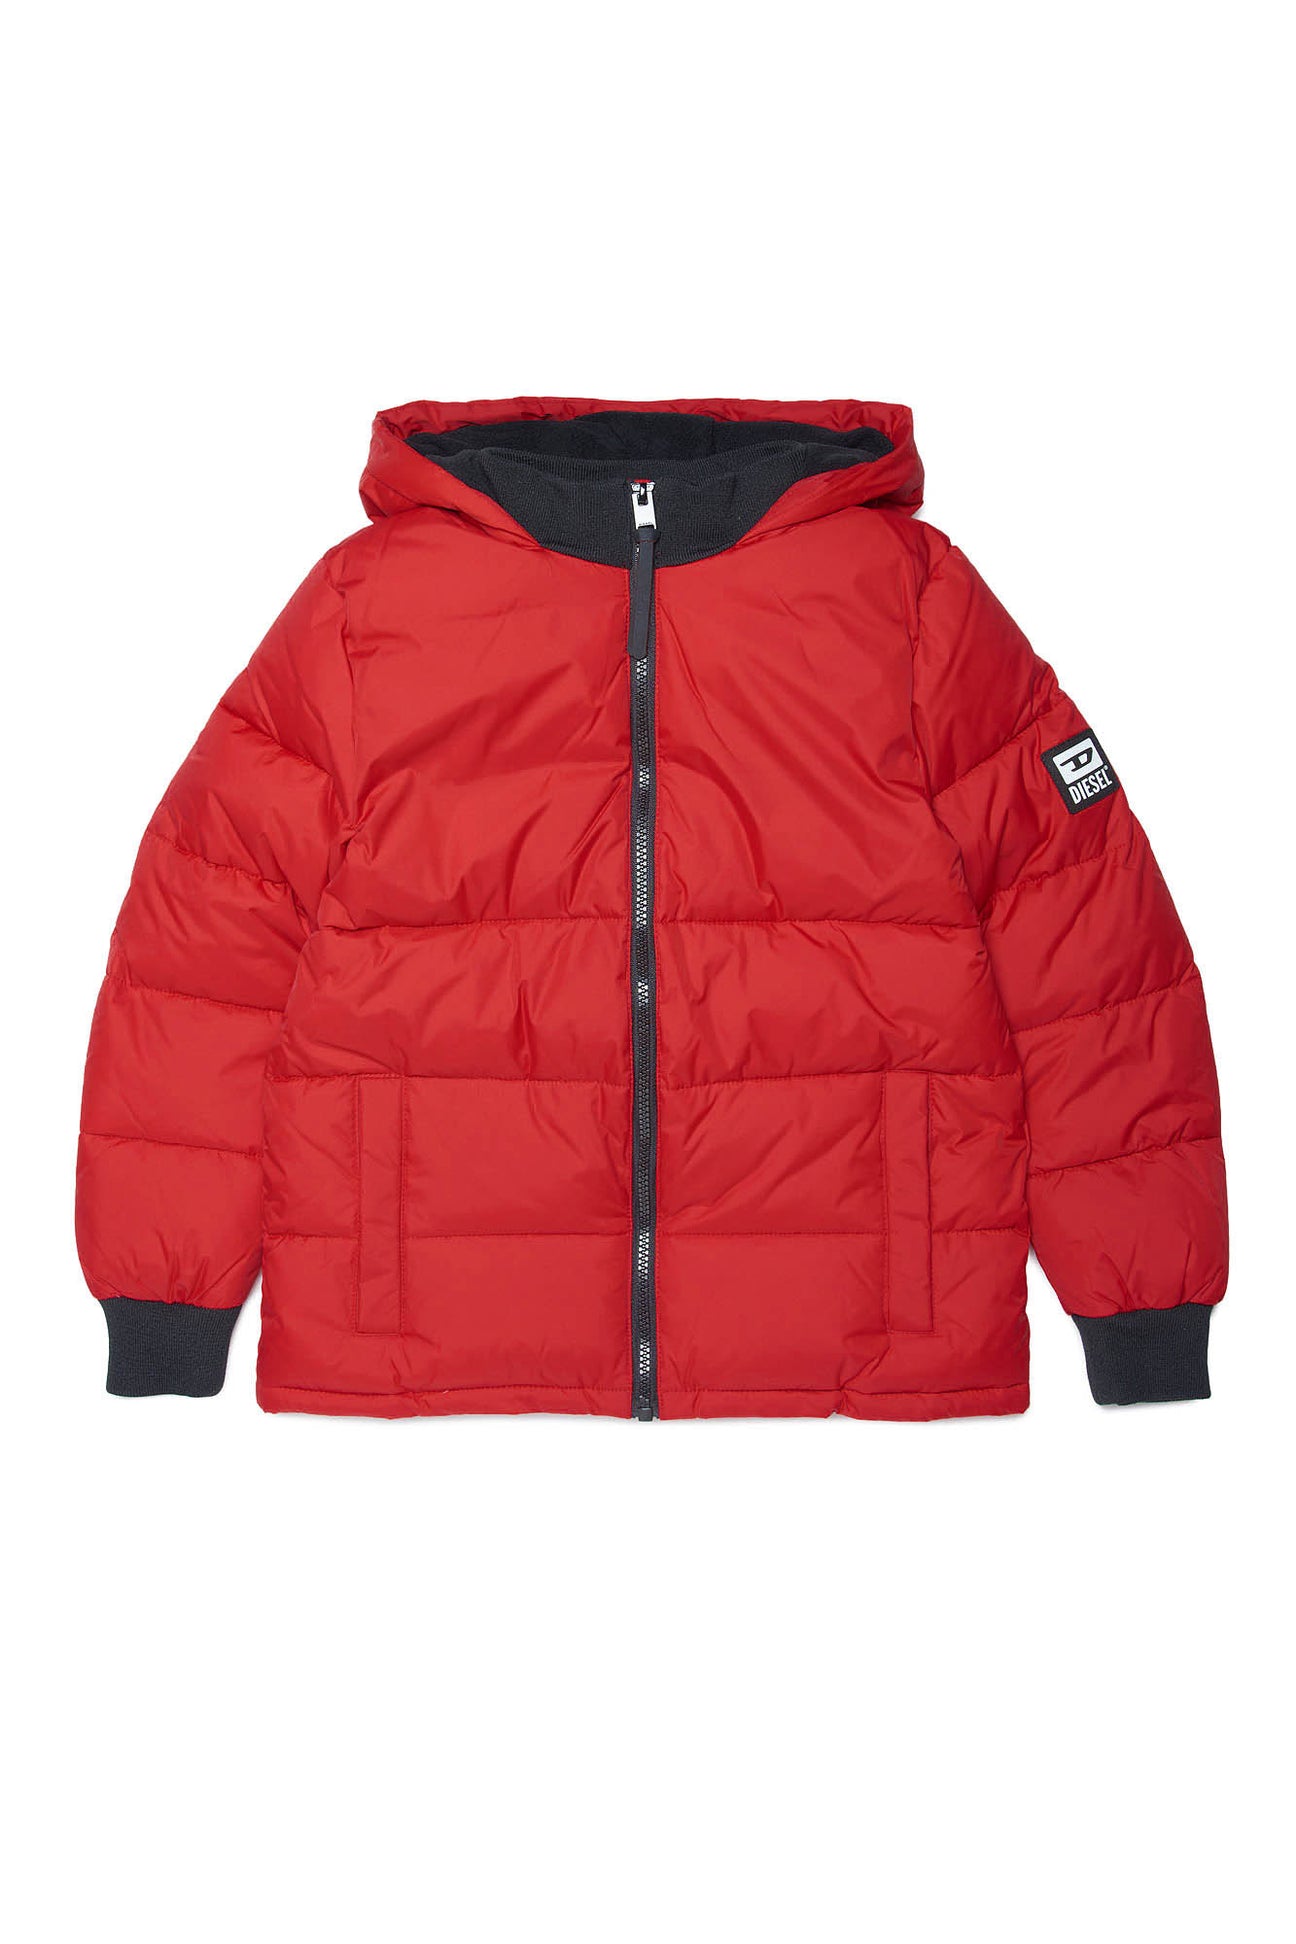 Red down jacket with Diesel logo on the back 